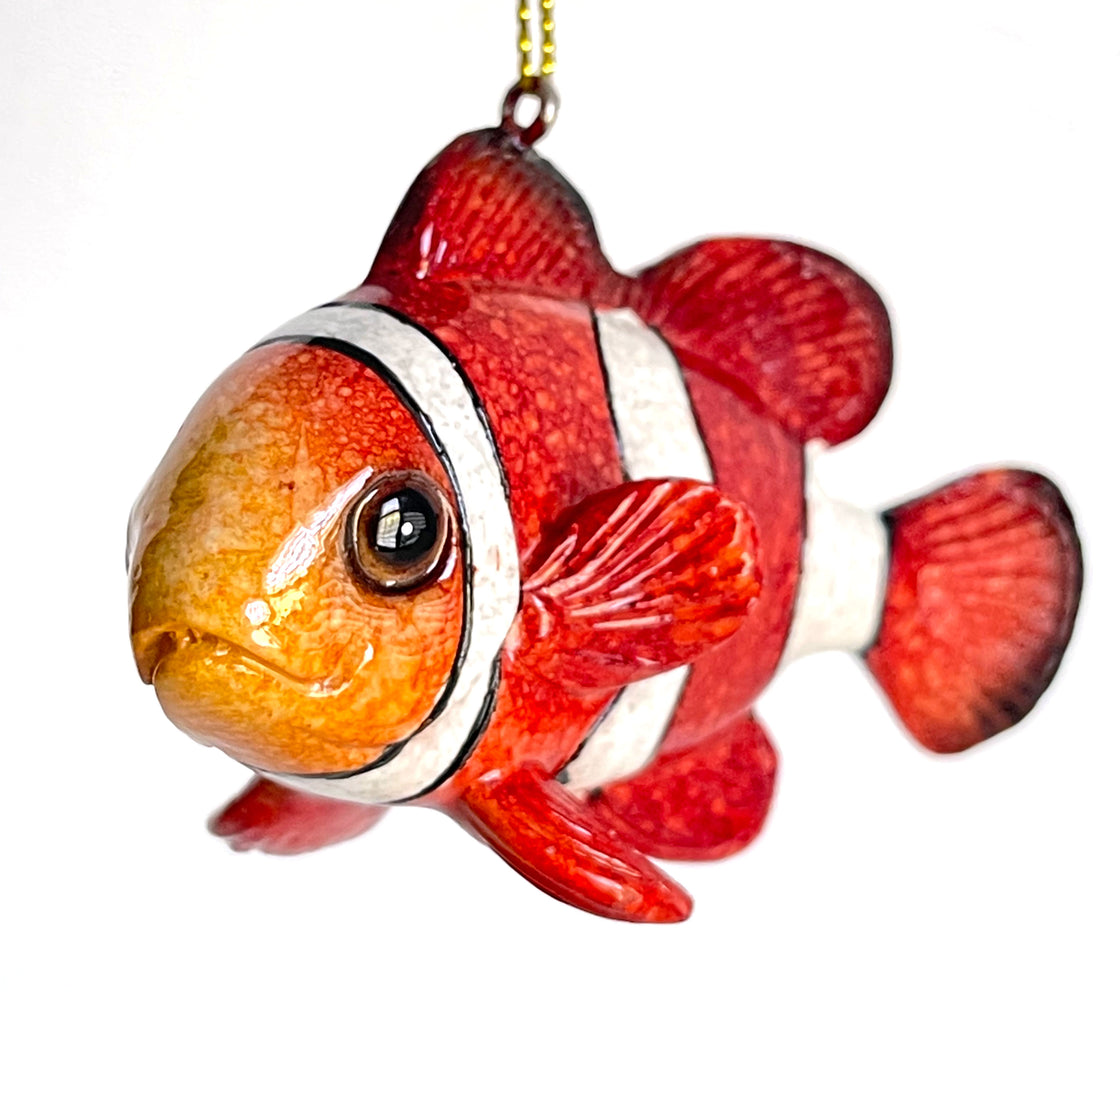 Christmas Ornaments - Home Decor - Hand-Painted Clownfish - Best for Tree Hanging, Bathroom Decorations, Stocking Stuffers, Scuba Lovers and Ocean Enthusiasts